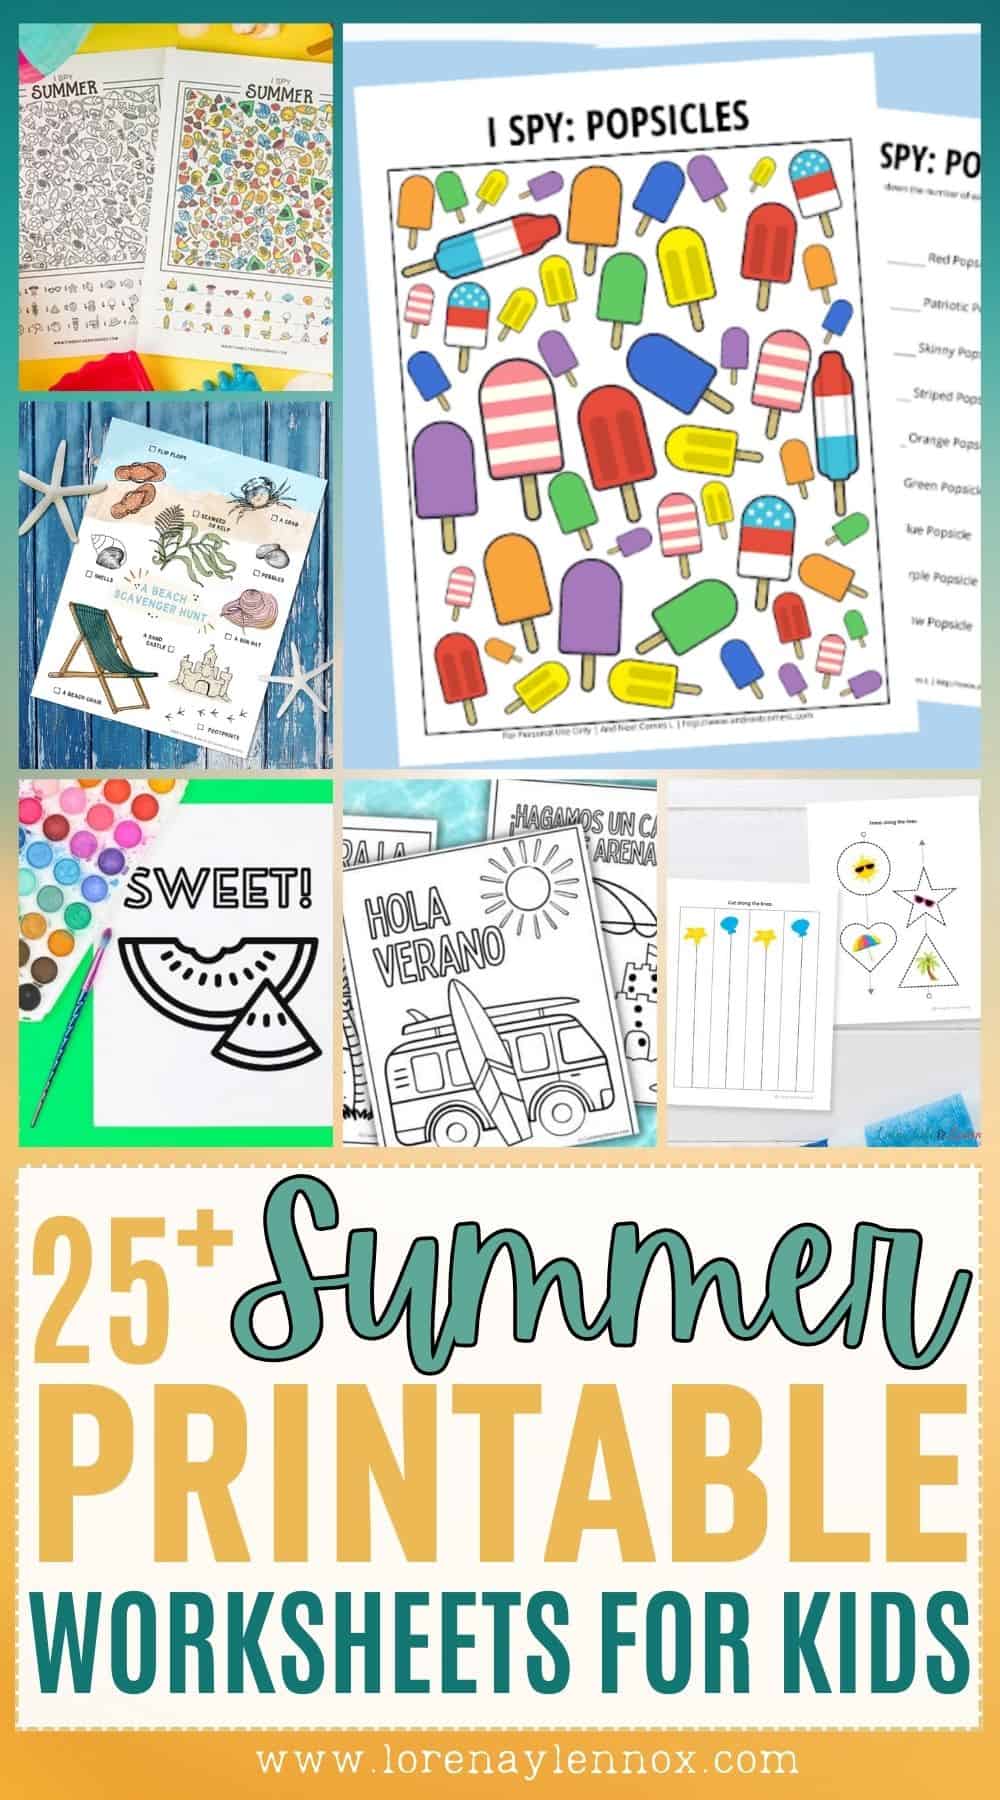 Unleash the joy of learning this summer with our Pinterest collection of 23+ engaging preschool activities! From outdoor games and nature exploration to themed crafts and sensory play, our carefully curated worksheets offer endless fun and educational opportunities.